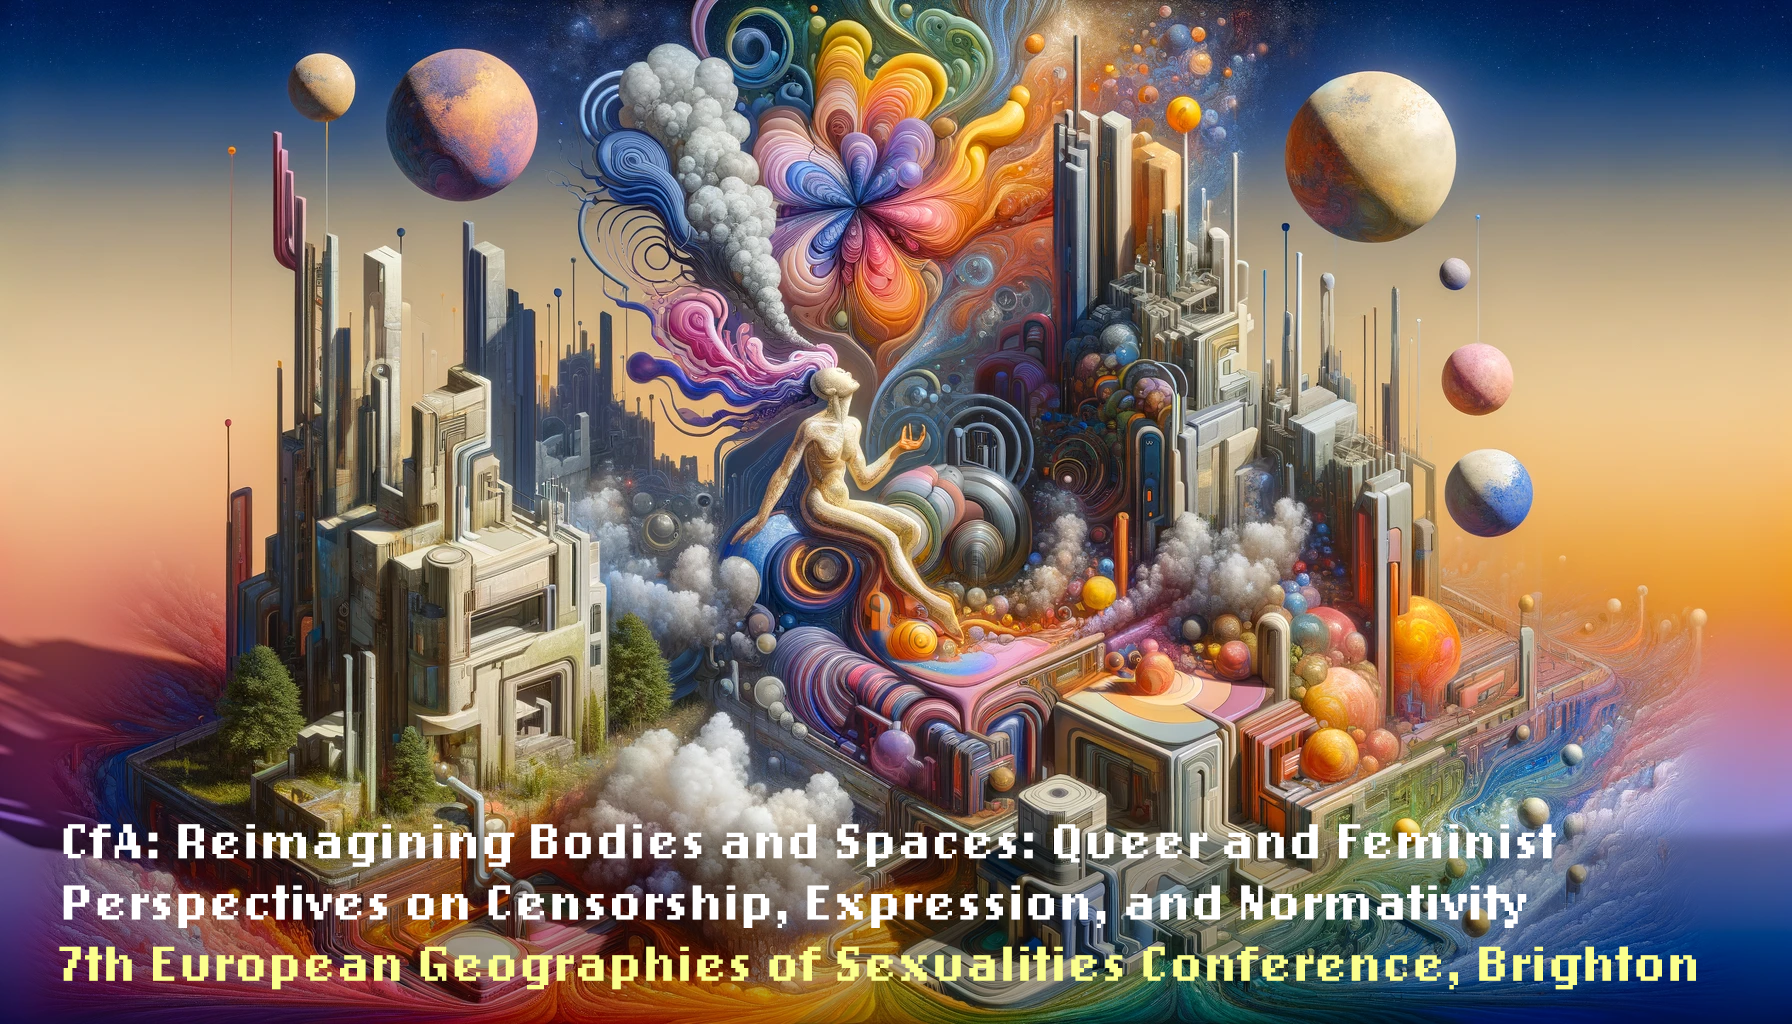 Call for Abstracts: Reimagining Bodies and Spaces: Queer and Feminist Perspectives on Censorship, Expression, and Normativity